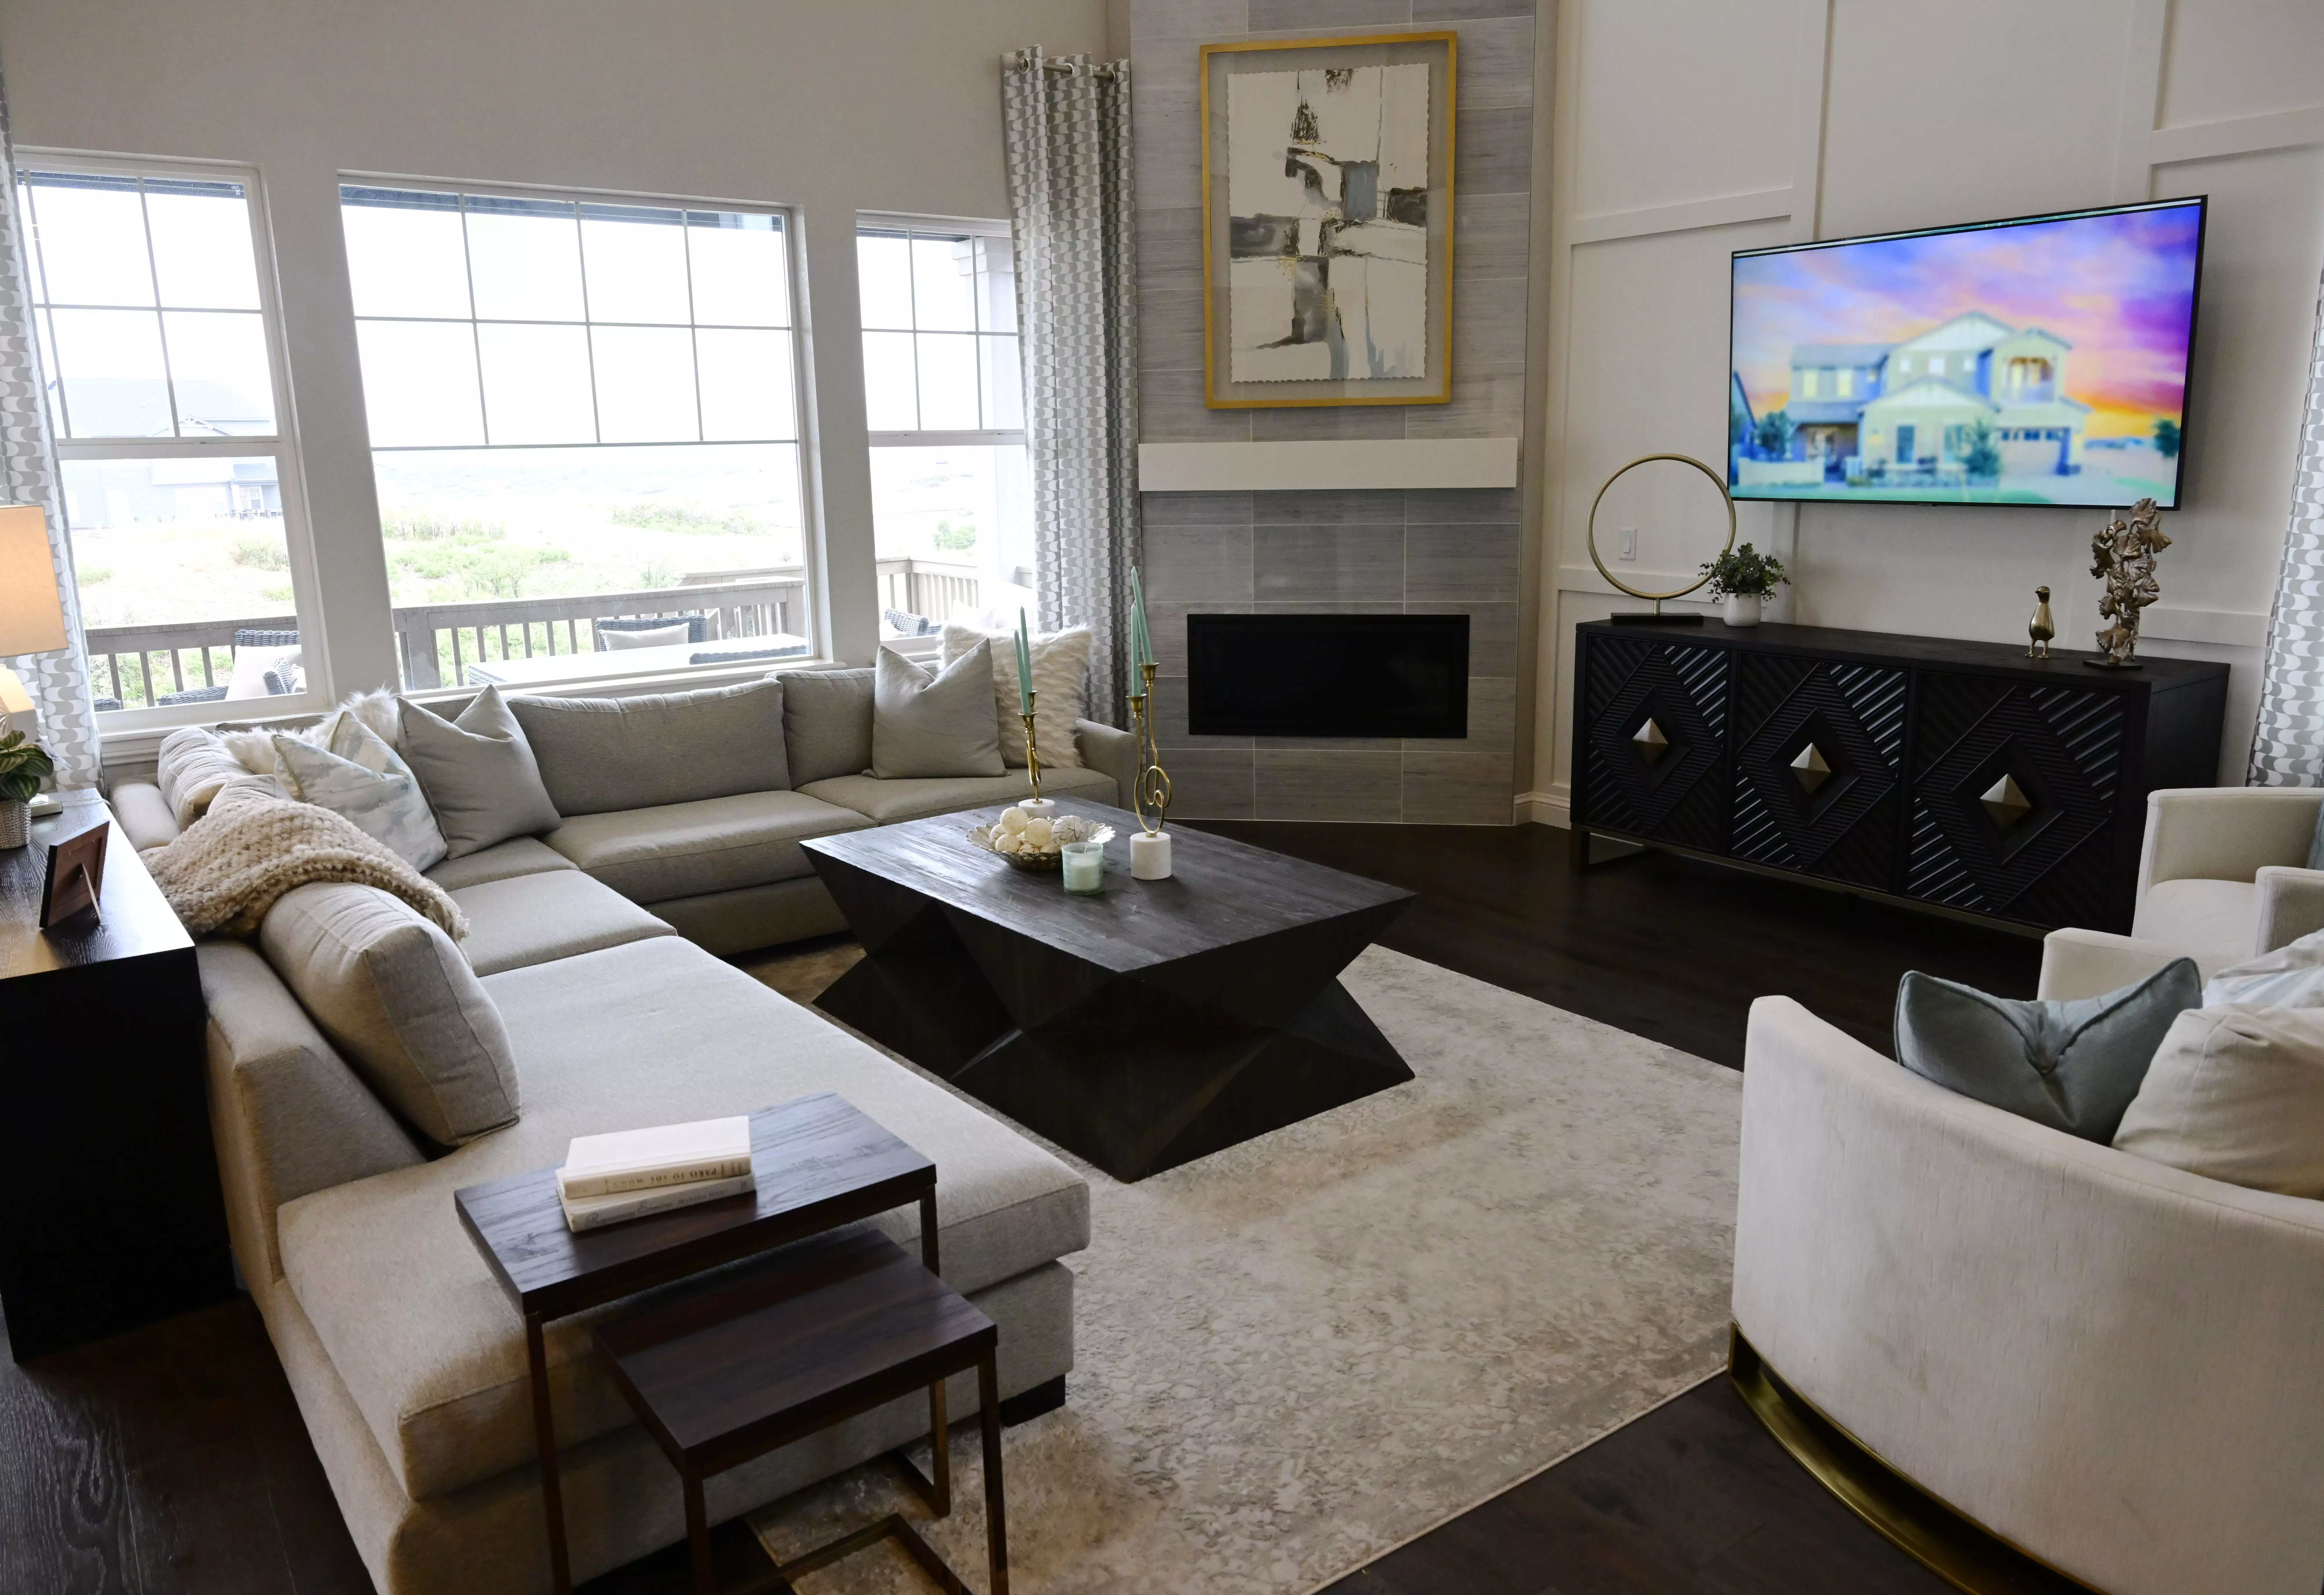 Living room area in the Taylor Morrison Vail model home at Macanta Sept. 22, 2022, in Castle Rock.